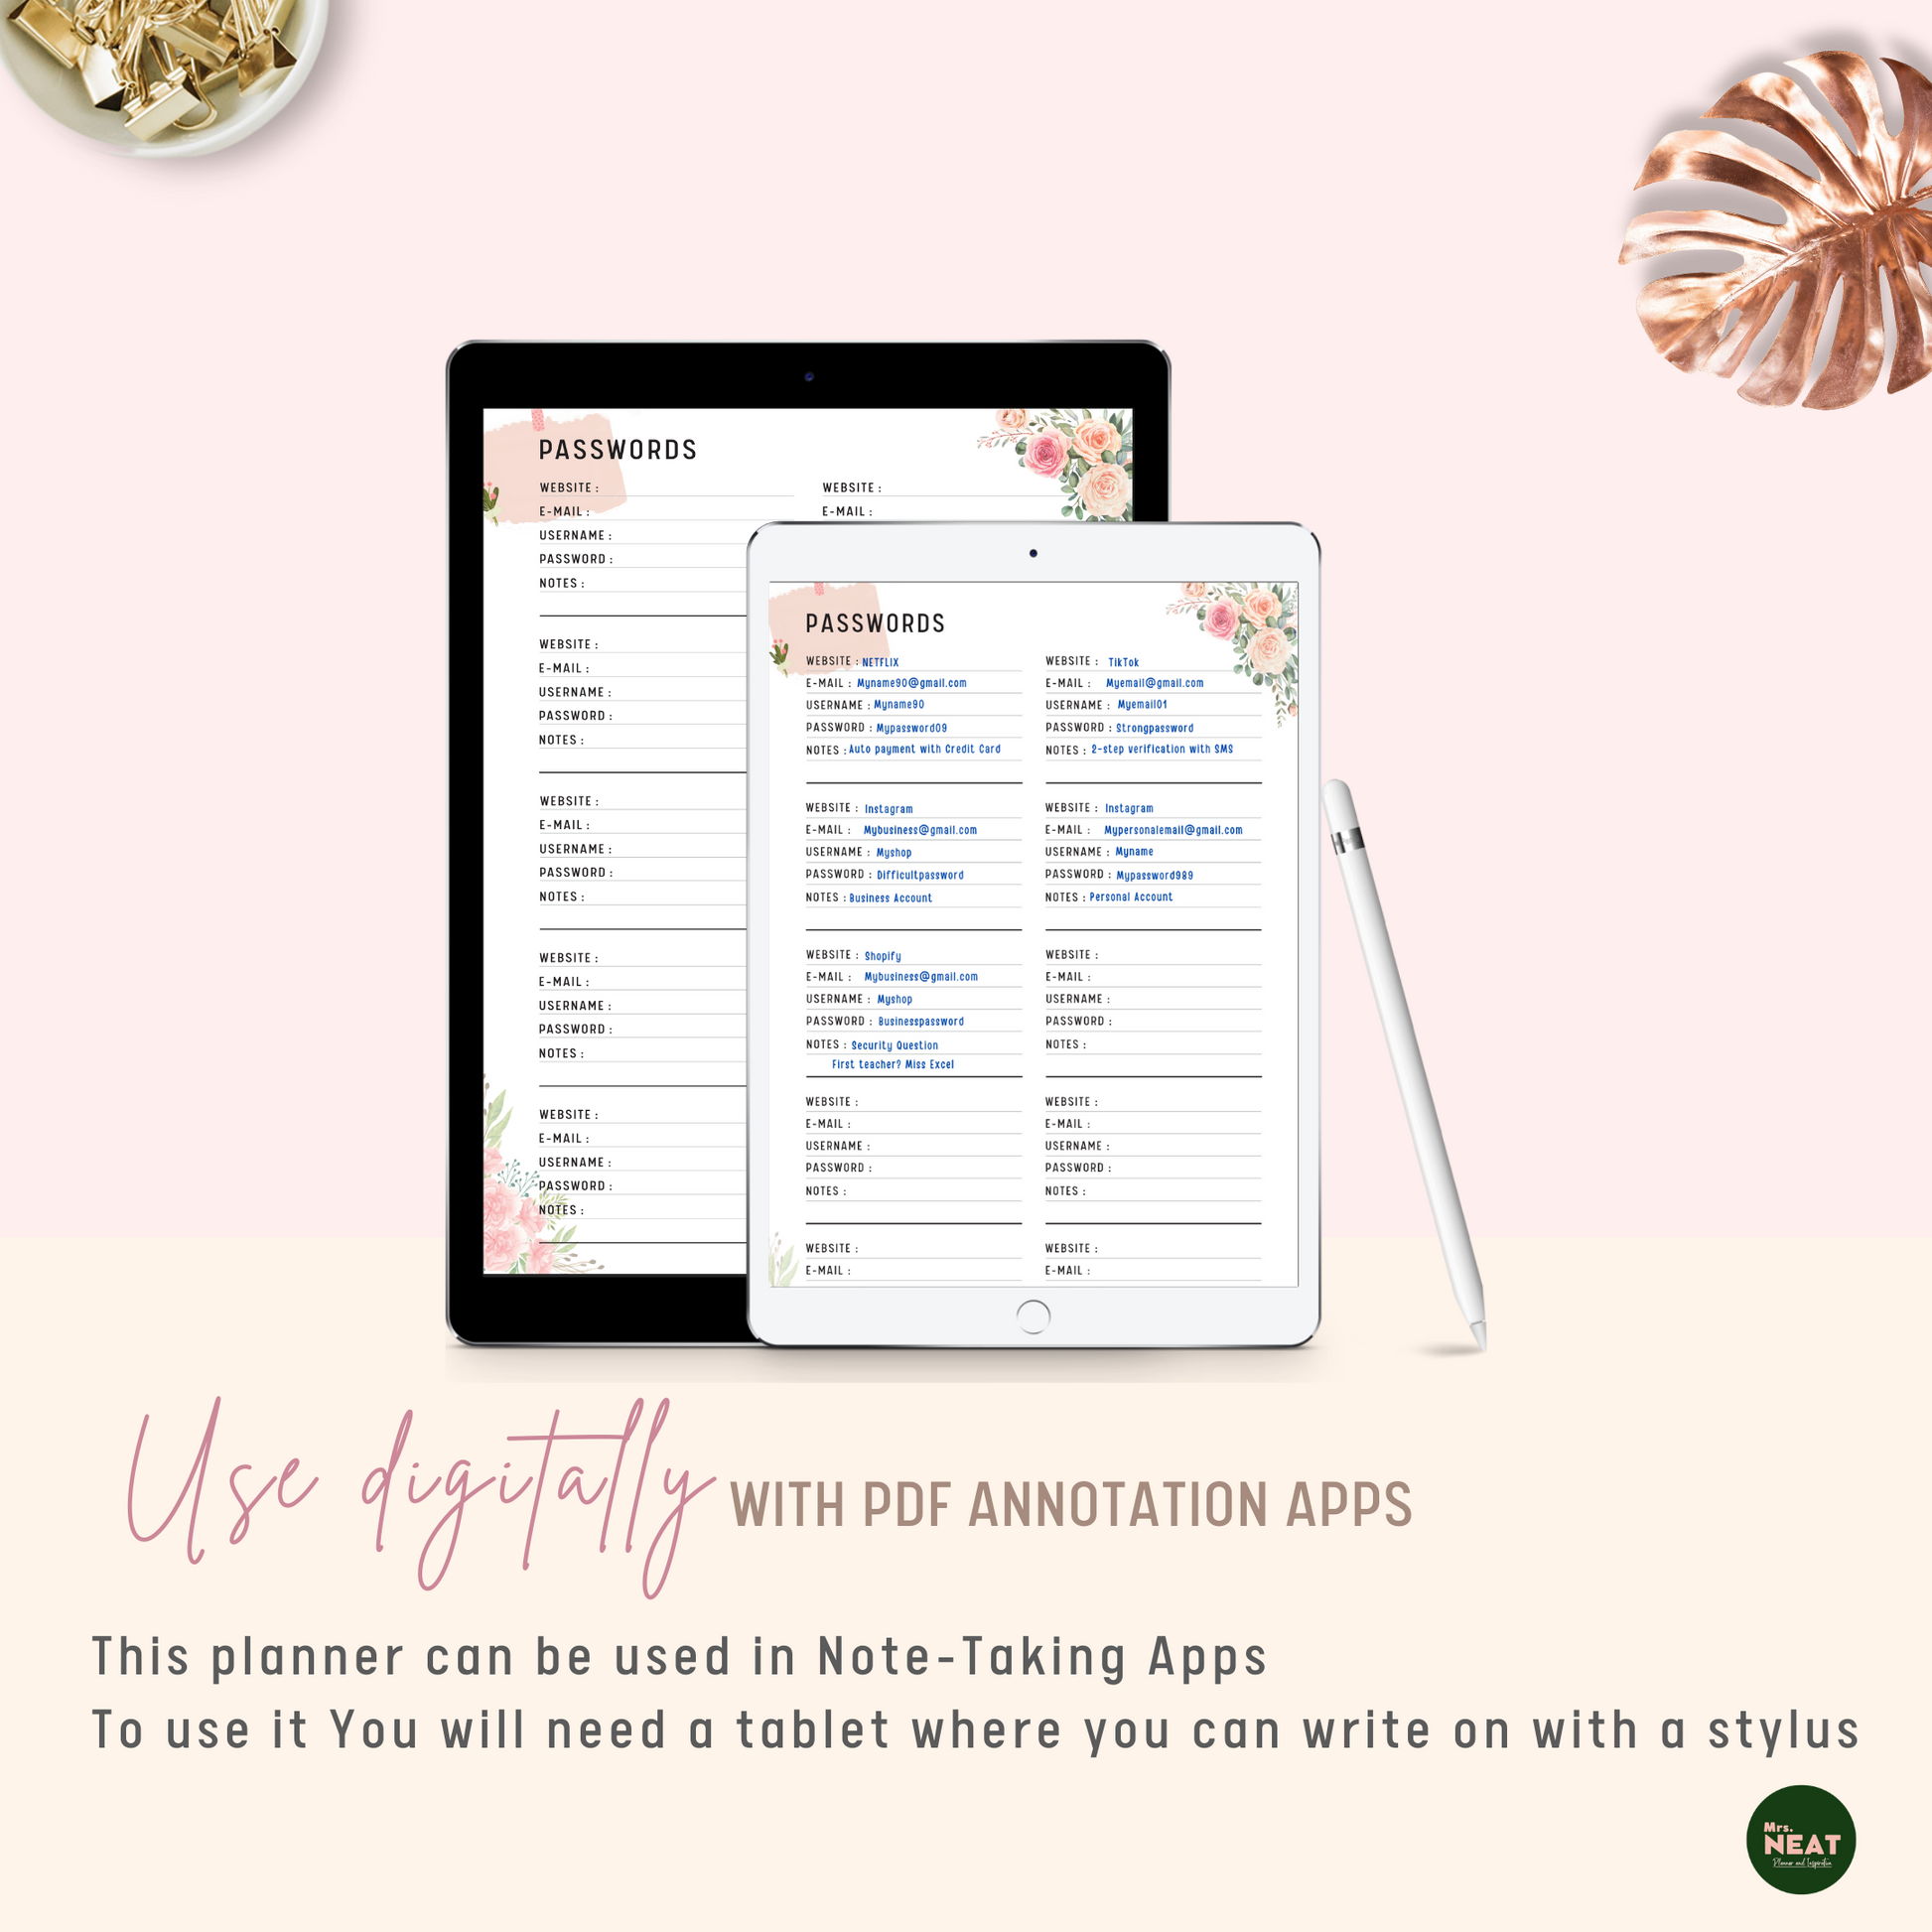 Floral Password Tracker Planner used Digitally with Tablet and Stylus